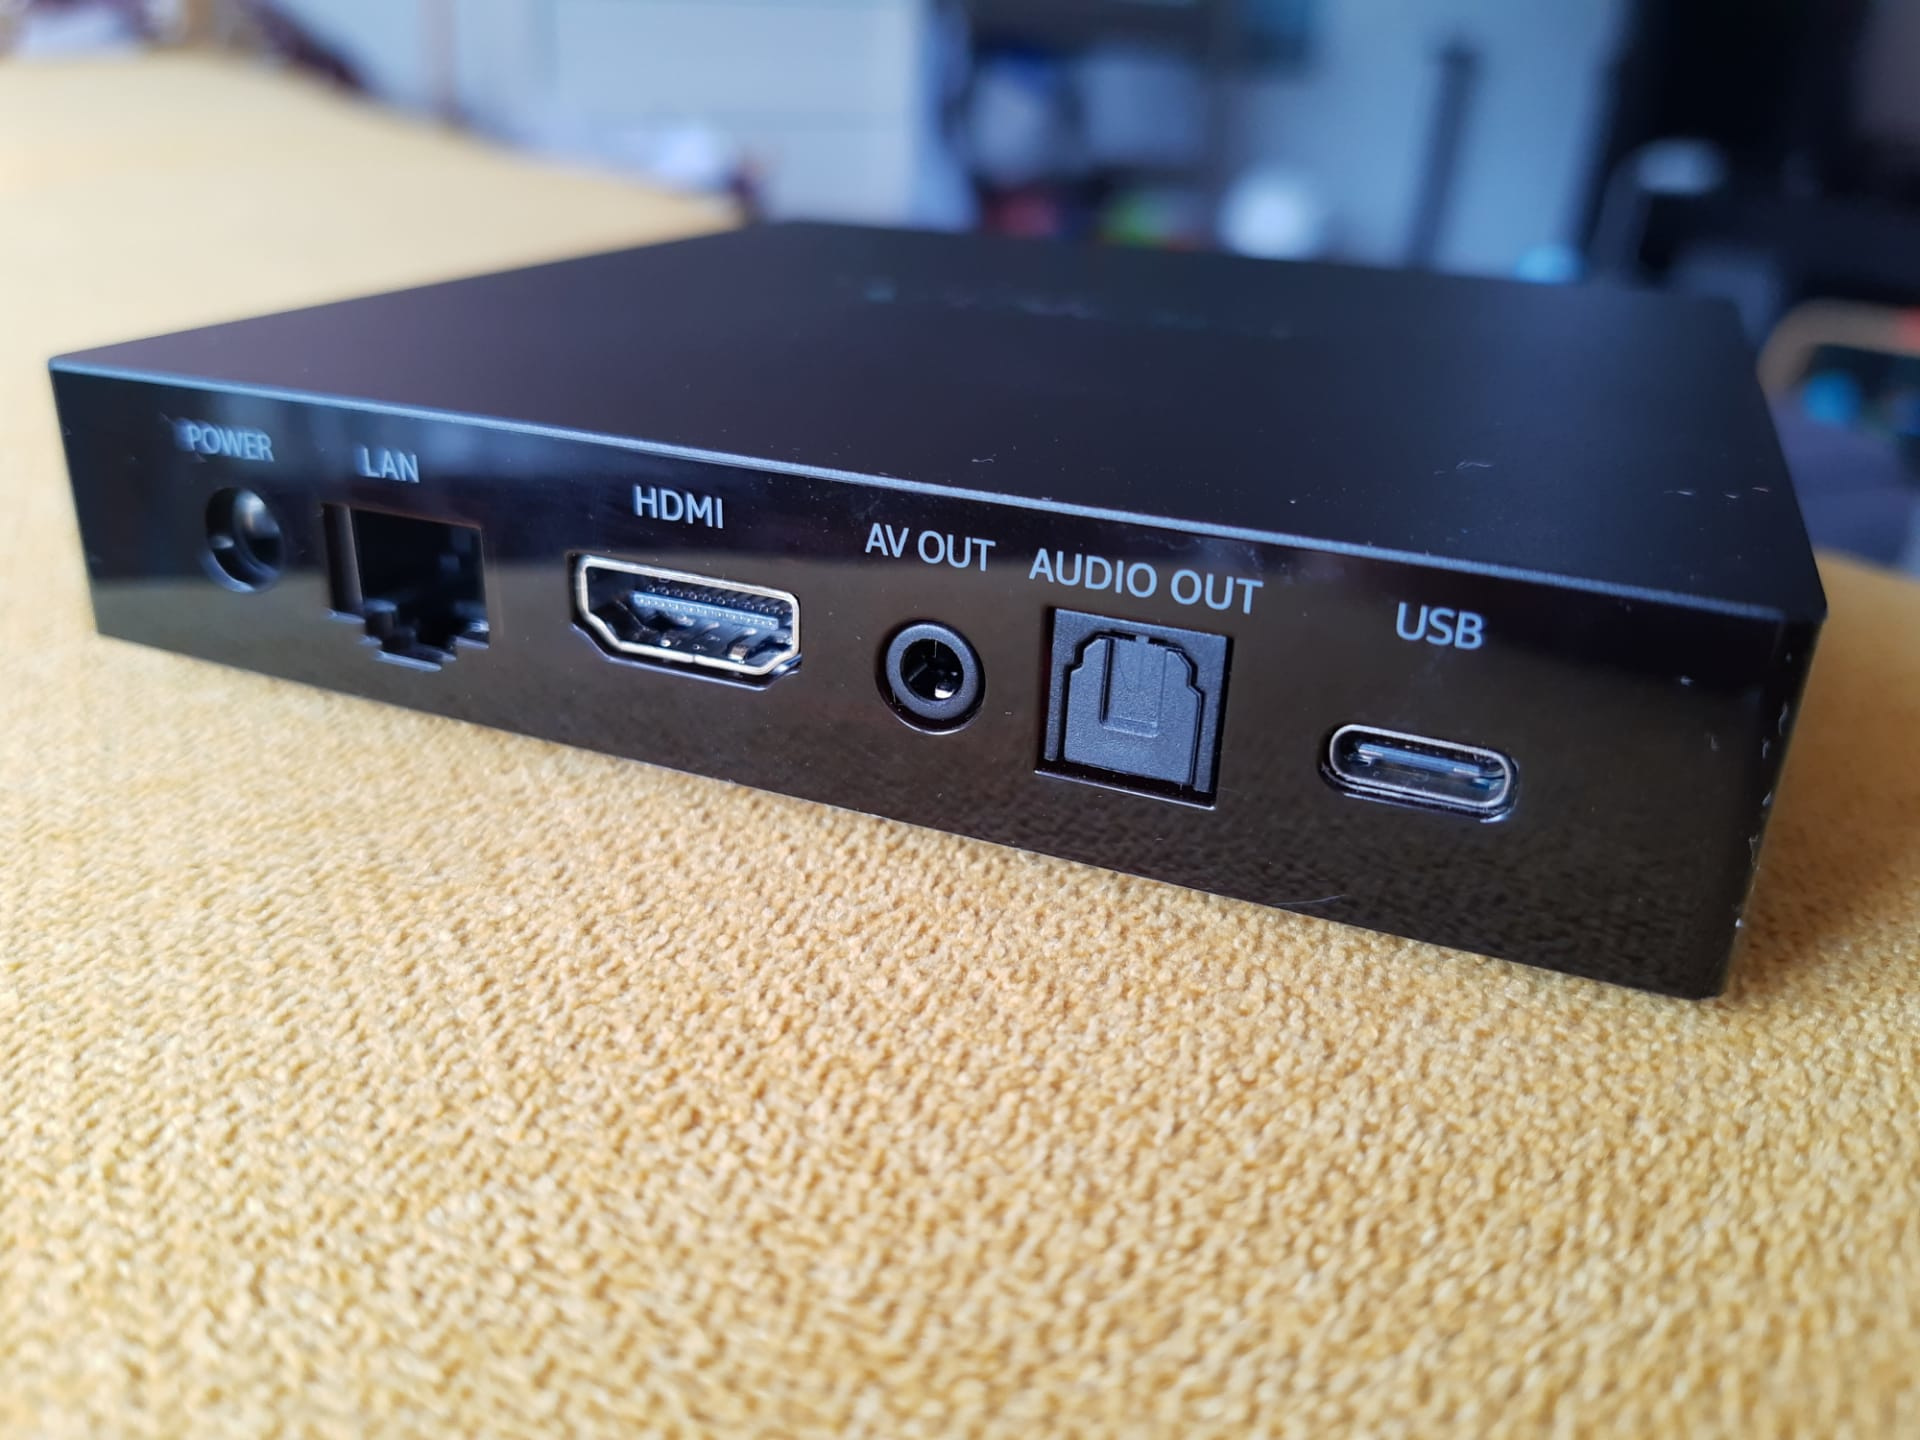 In addition to a power and HDMI connection, the Nokia Streaming Box 8000 also has an Ethernet port (and WiFi), a line output, SPDIF out and a USB-C port, there is also a regular USB connection on the side.